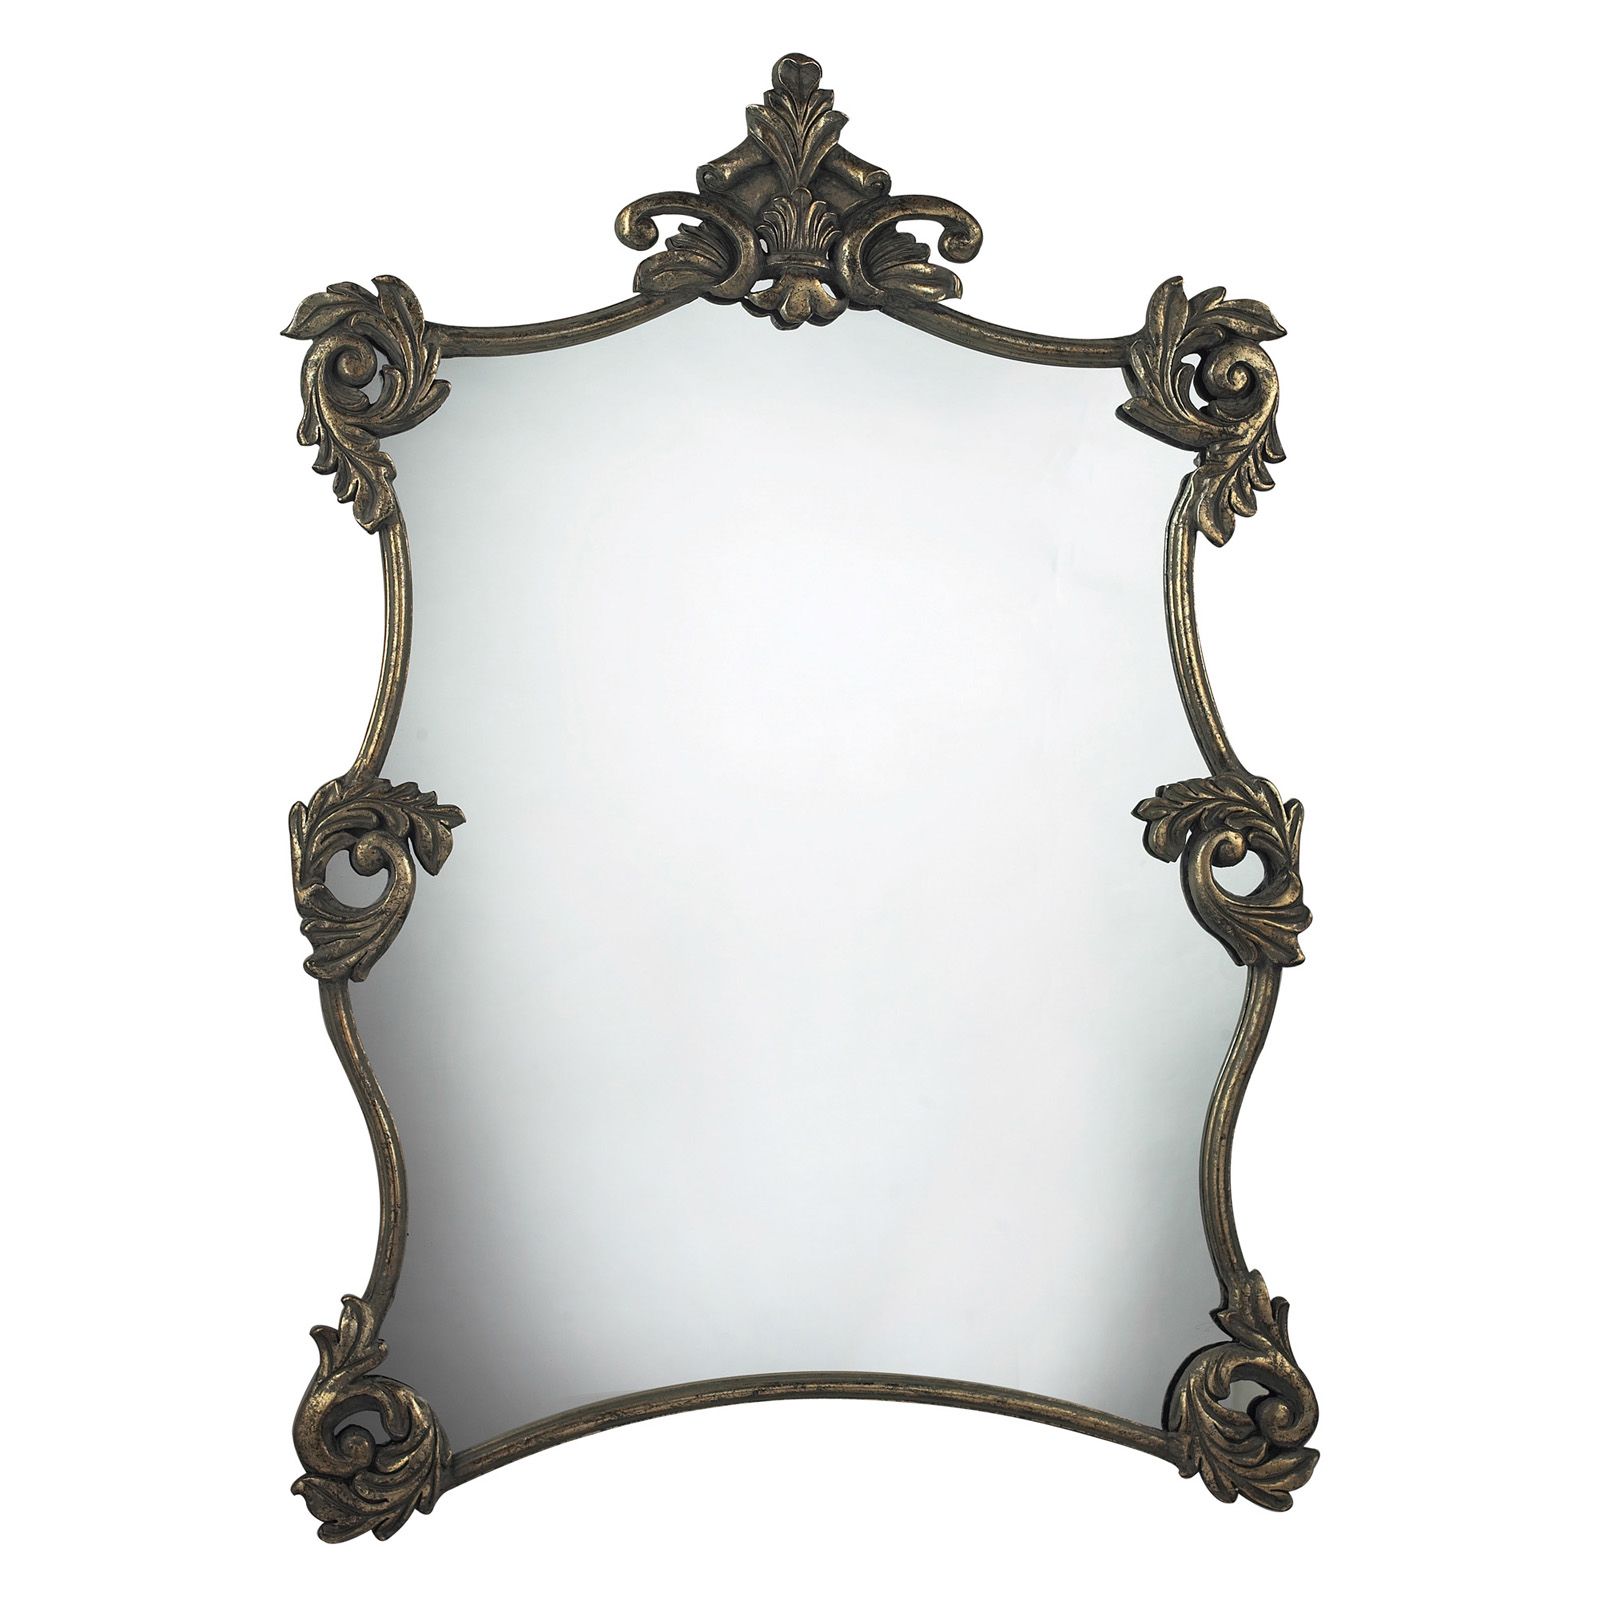 Arch Oversized Wall Mirrors For 2019 Elk Lighting Moorefield Fleur De Lis Oversize Arched Wall Mirror – 30w (View 7 of 15)